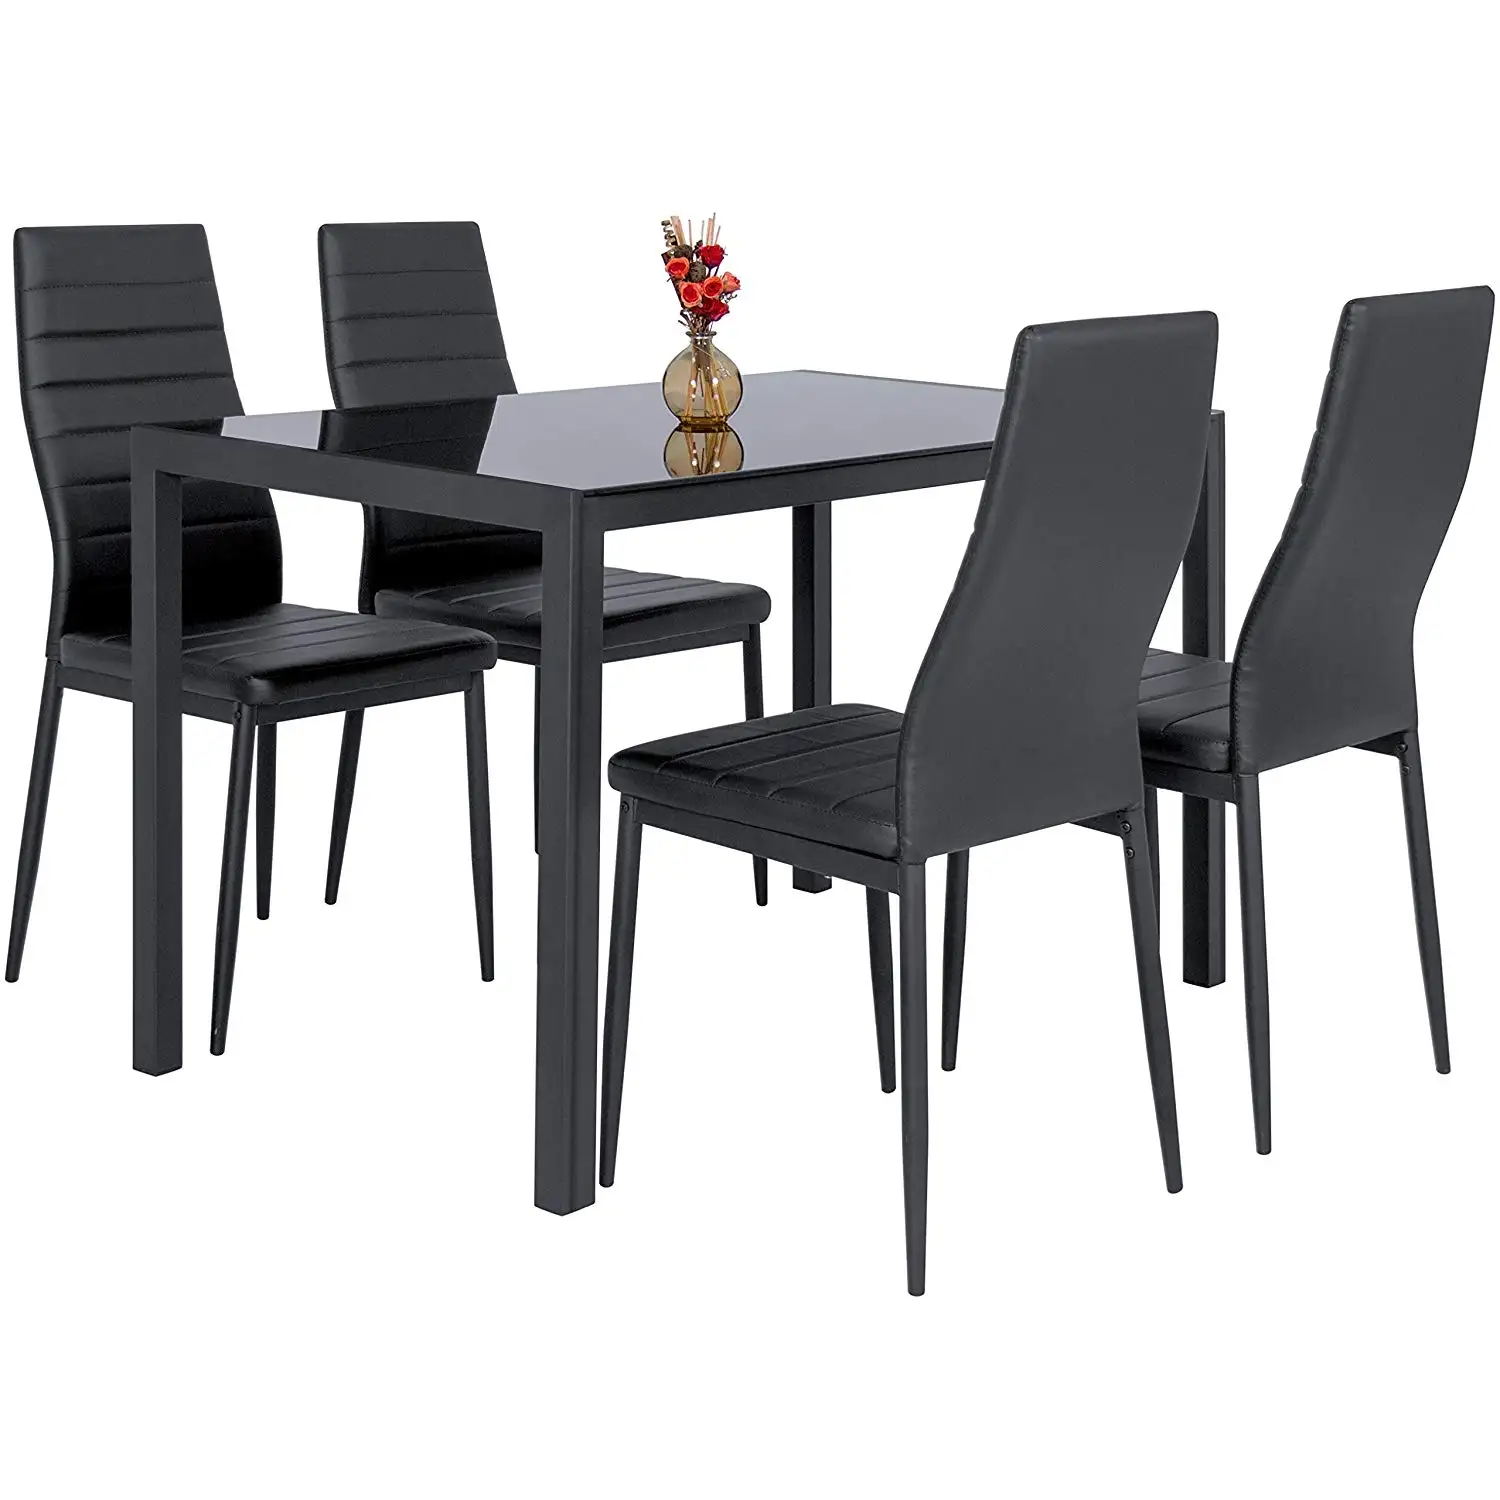 Factory directly supply 7 pieces dining table sets 6 black PVC chair 1 square tempered glass dining table new style dining table